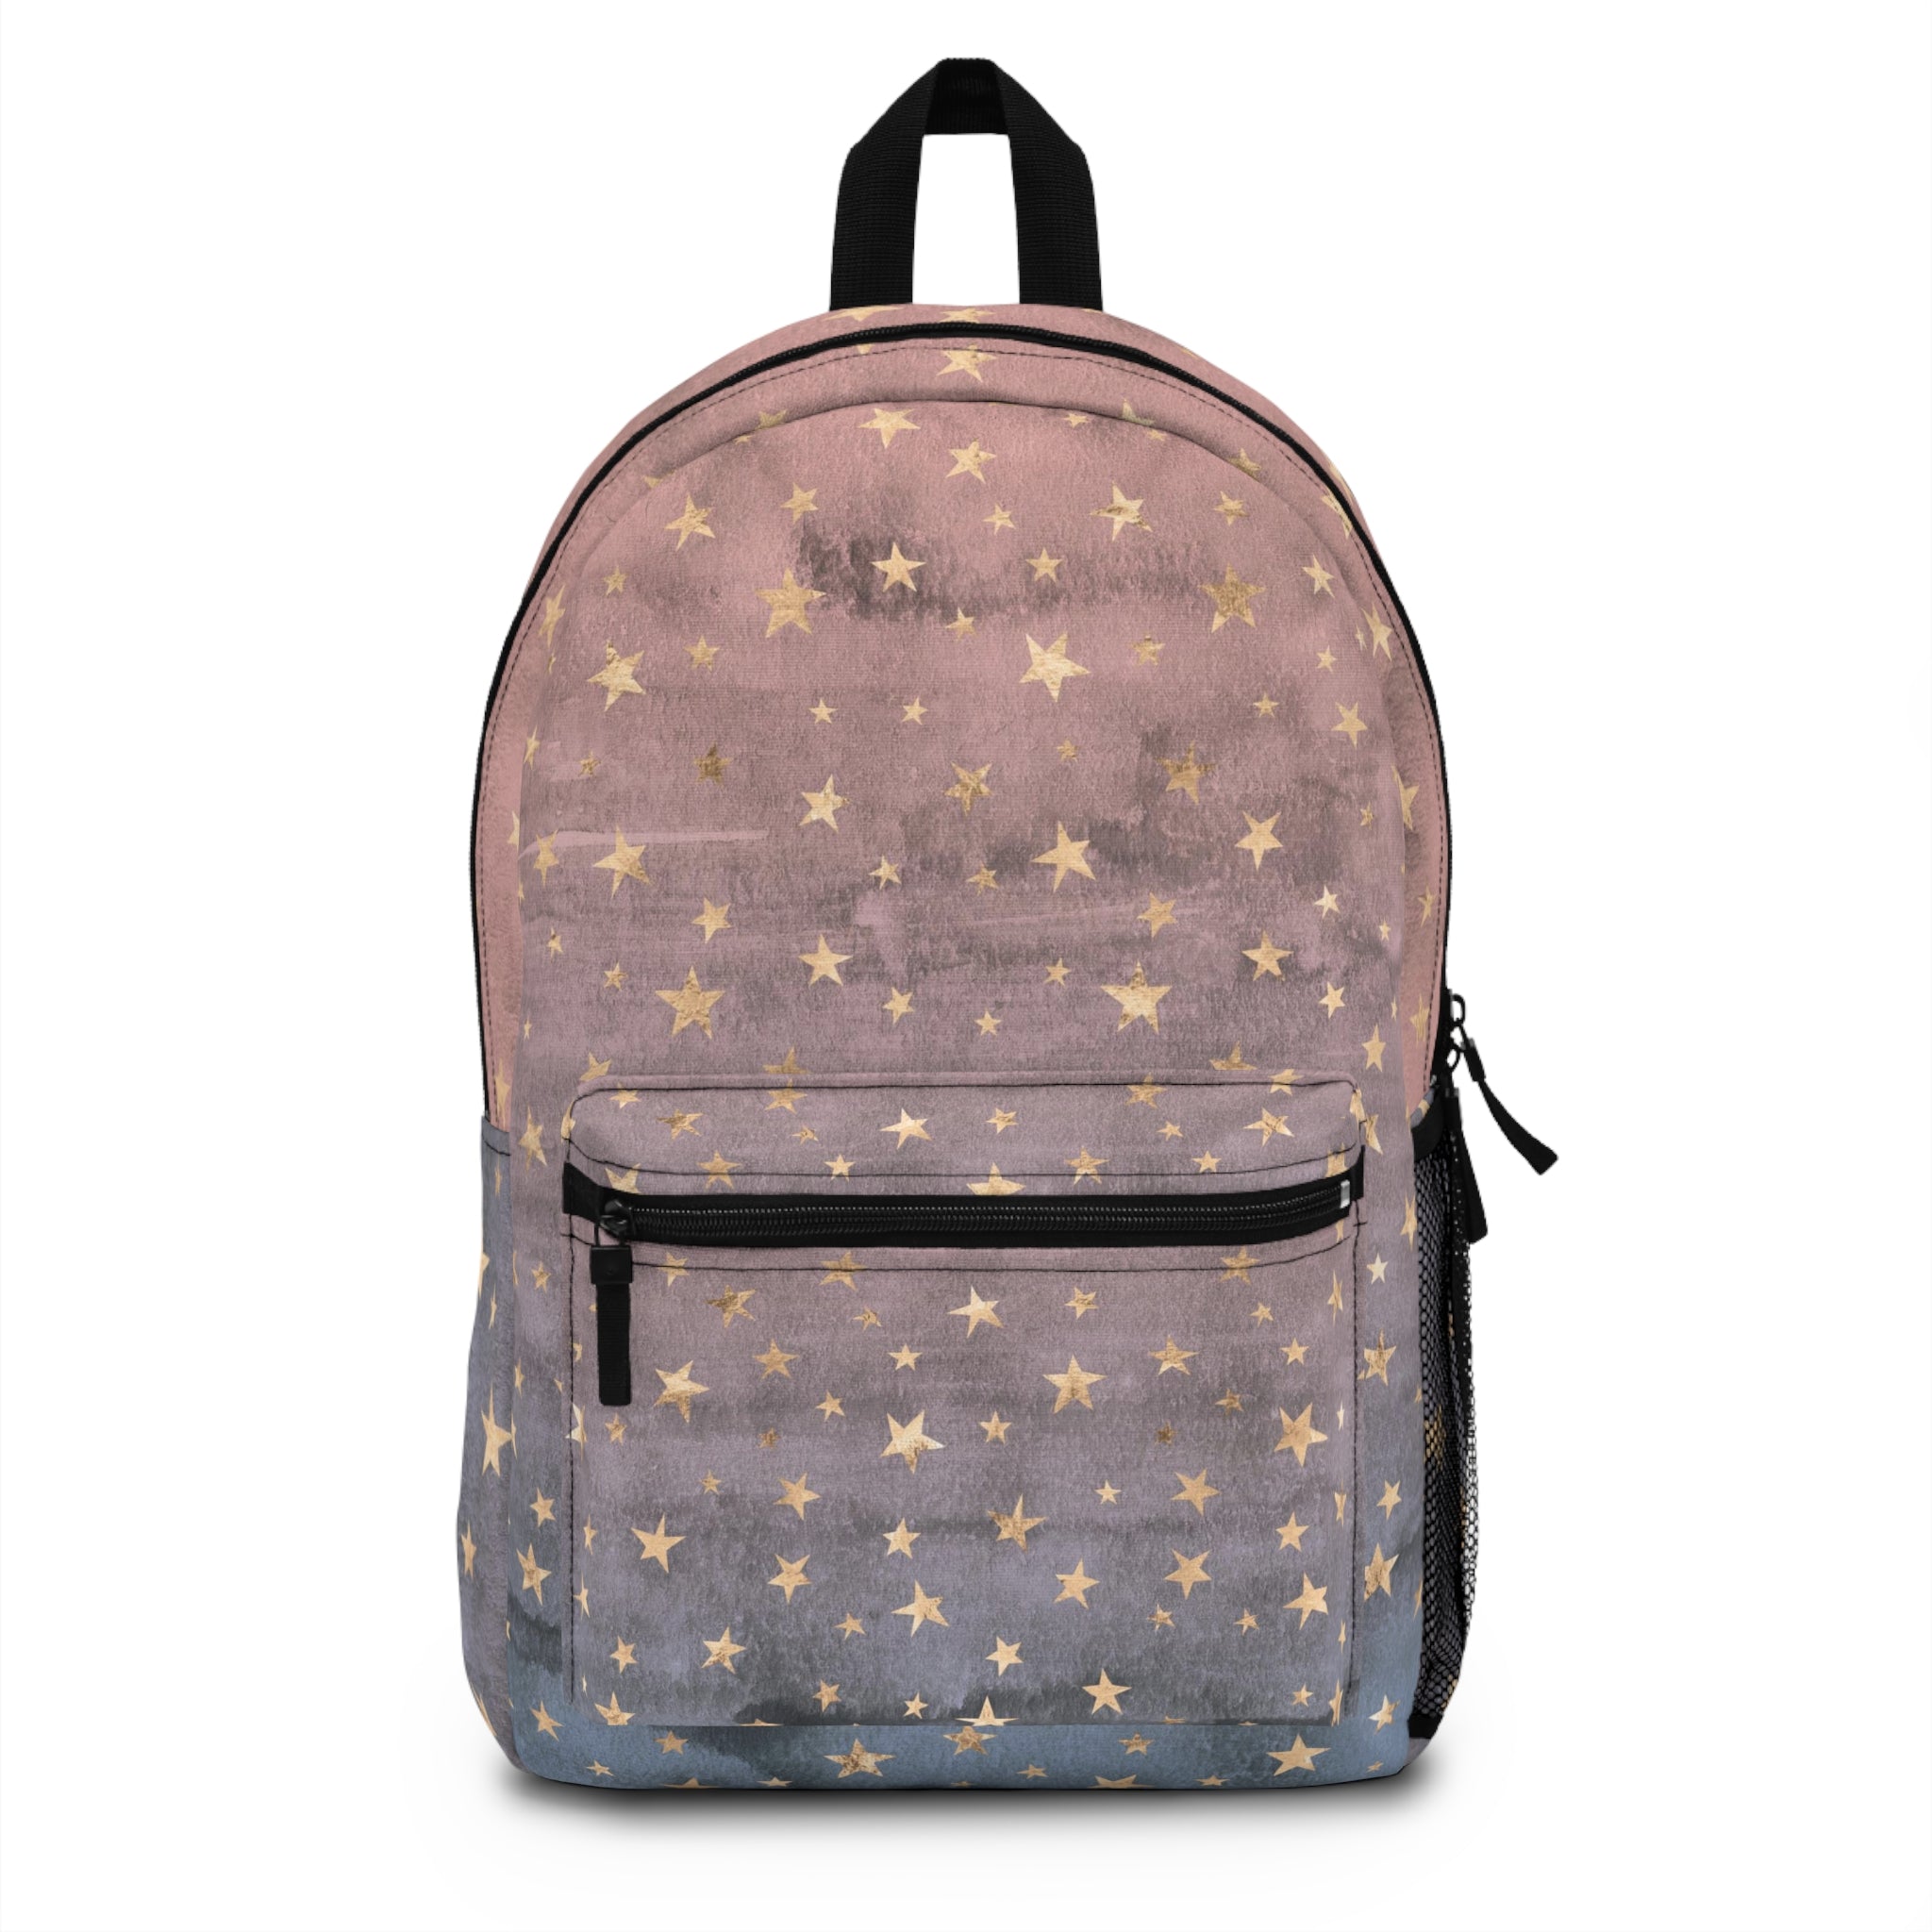 Star Gazer Backpack - Pretty Collected